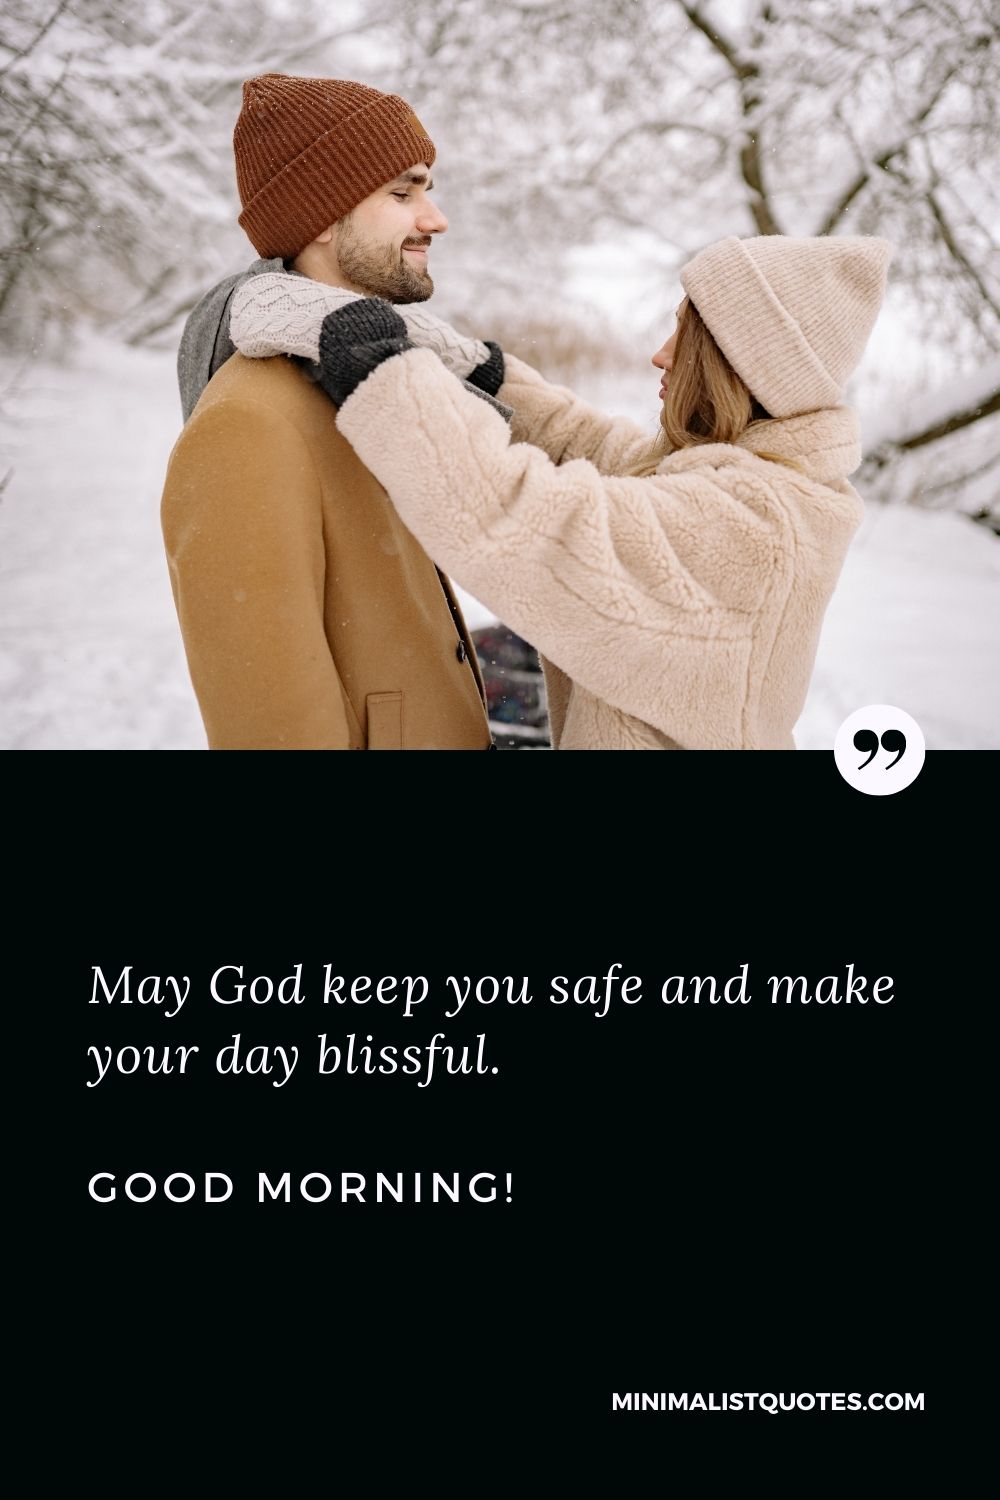 Good morning message to make him smile: May God keep you safe and make your day blissful. Good Morning!